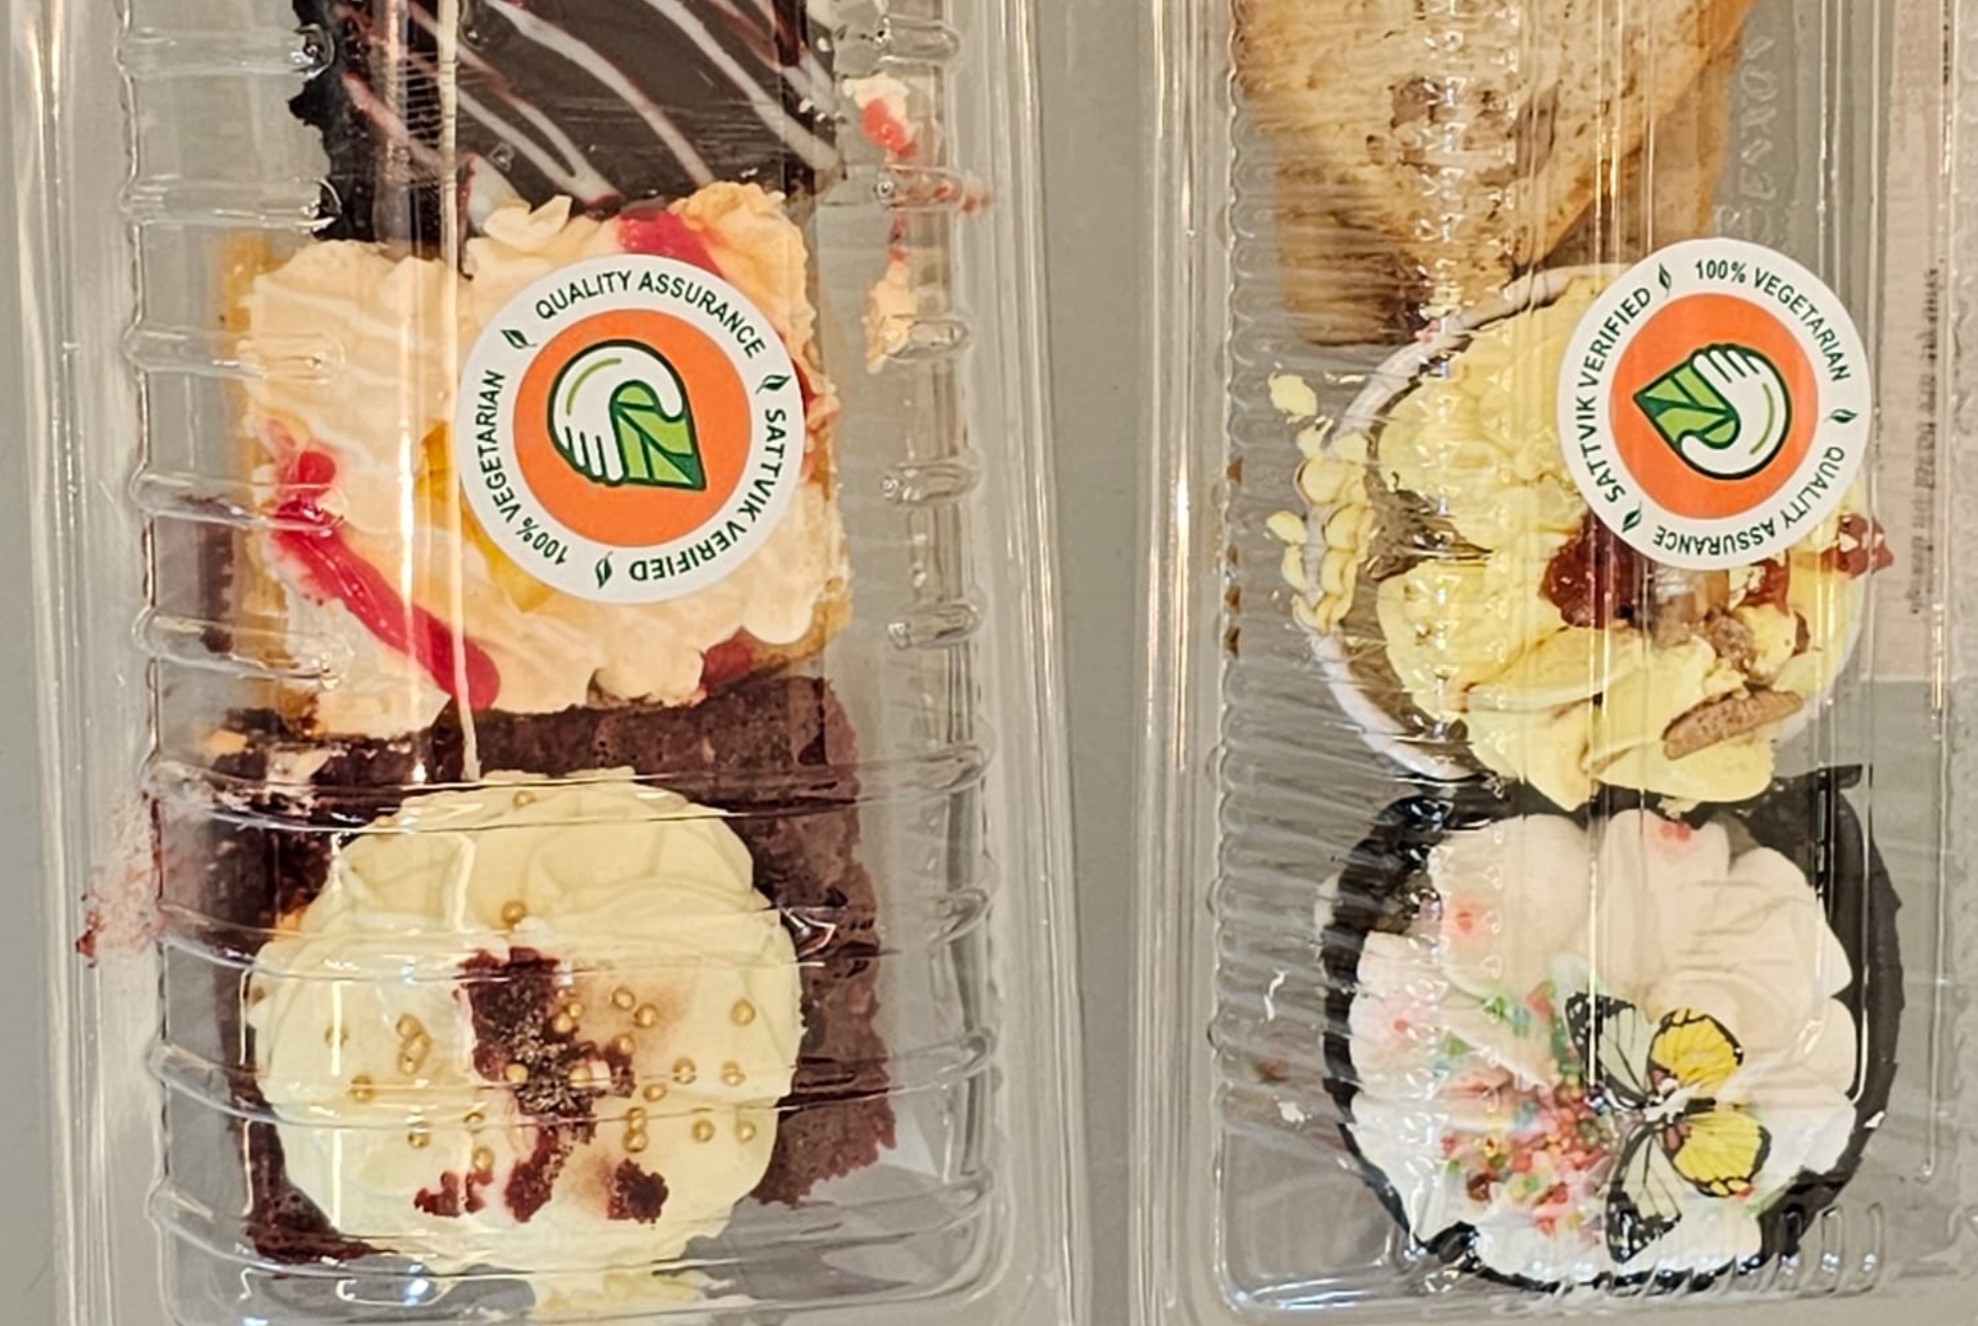 Sattvik Certified stickers pasted on the Vegetarian Cakes